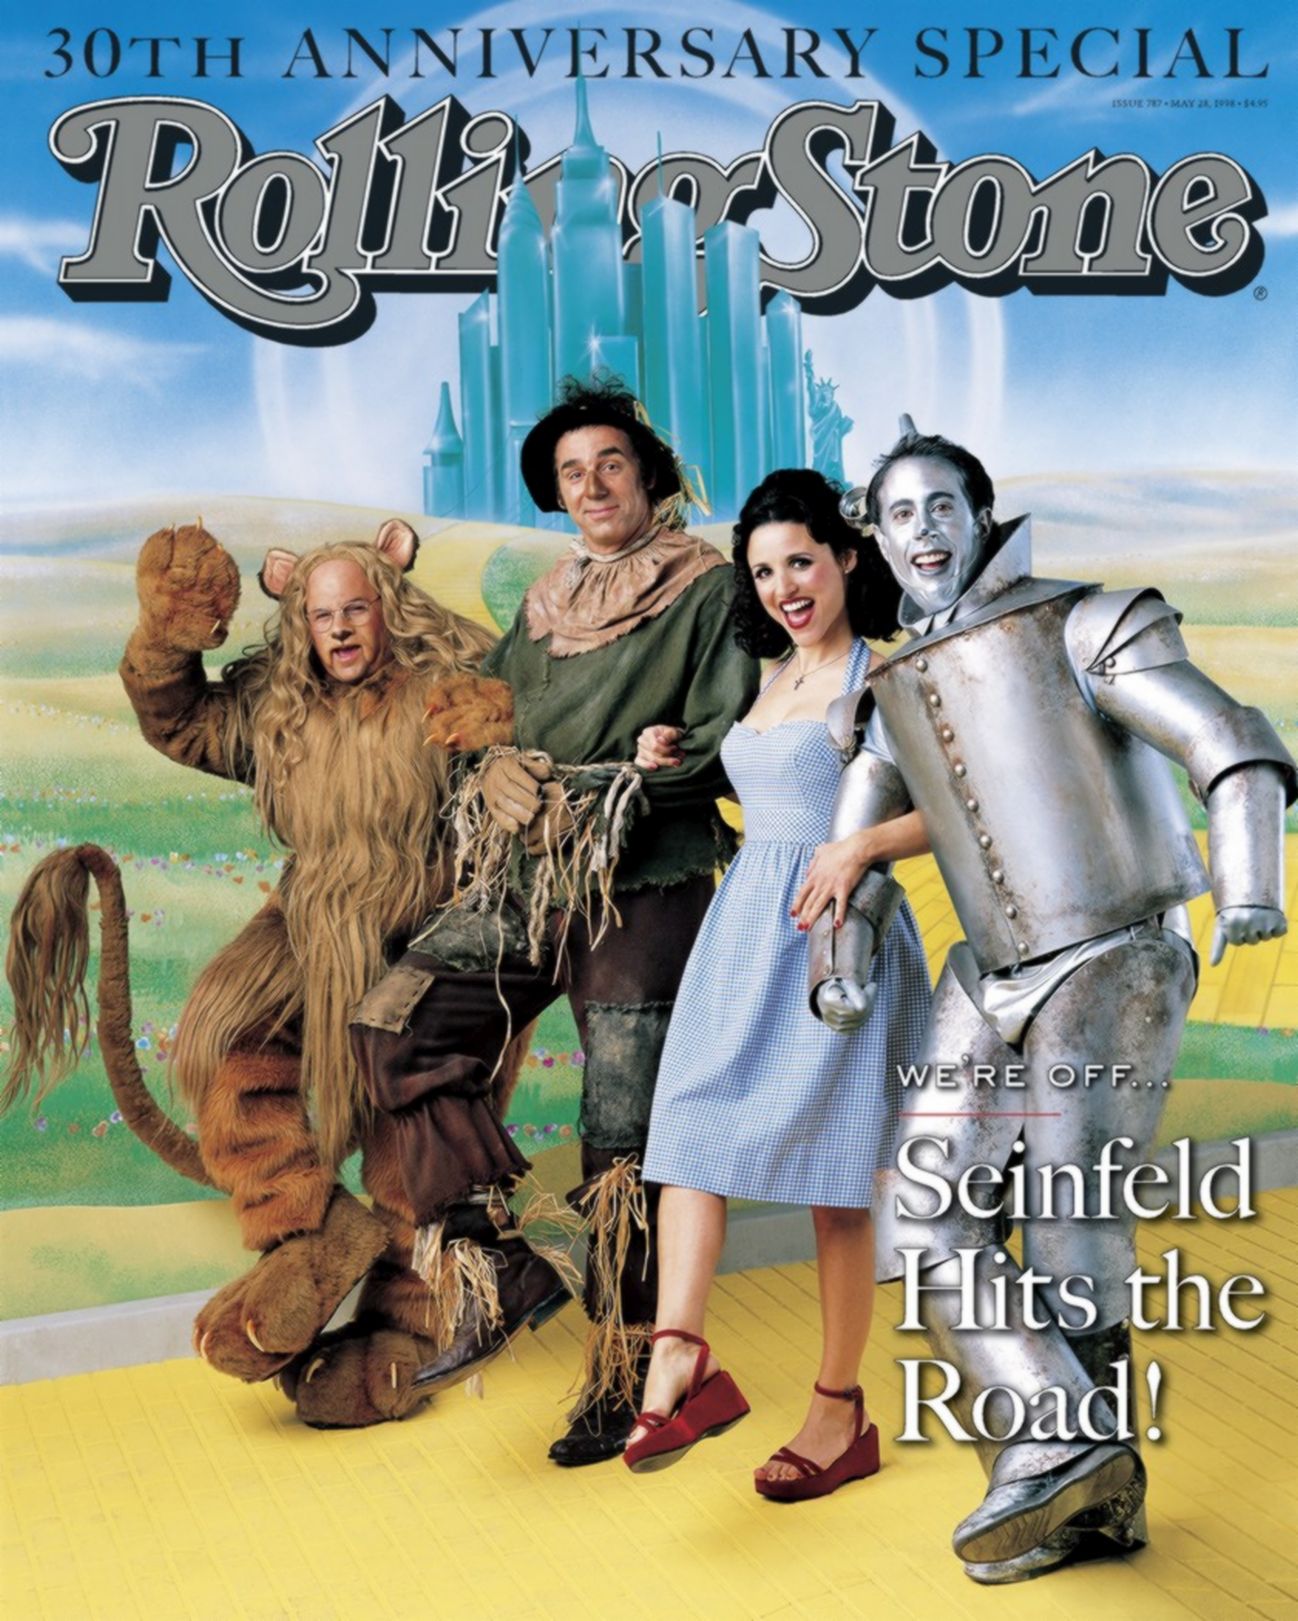 People 1298x1621 Seinfeld magazine cover The Wizard of Oz Statue of Liberty Julia-Louis Dreyfus looking at viewer Tin Man Scarecrow (character) open mouth smiling crucifix red lipstick glasses gloves red shoes TV series